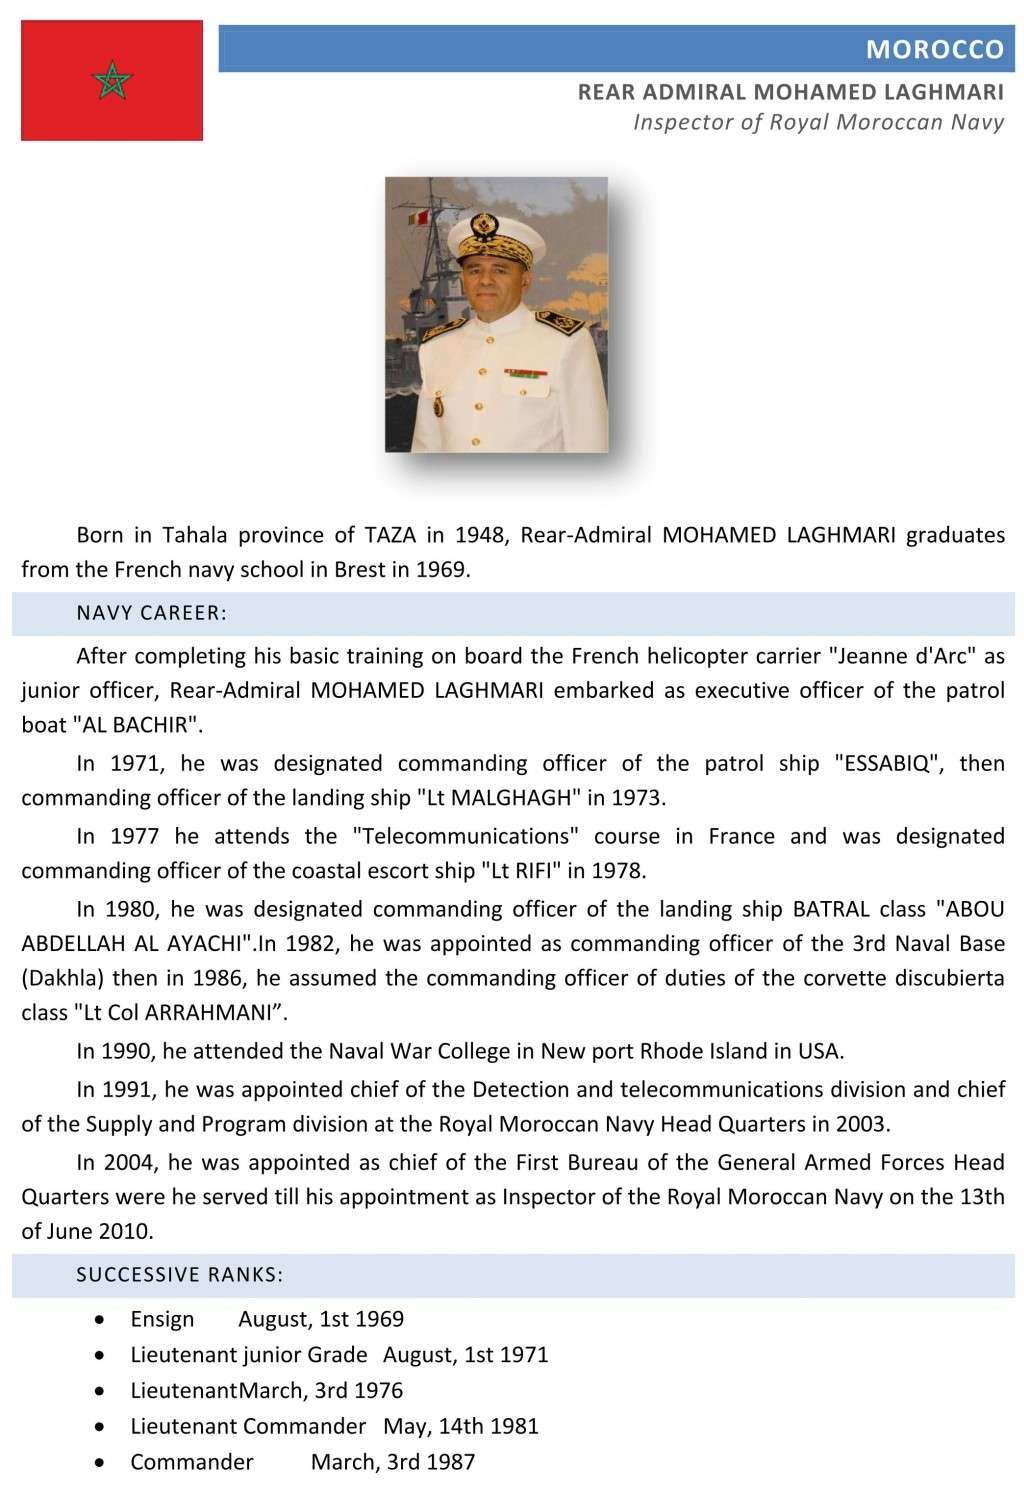 Vice-Amiral Mohamed Laghmari  - Page 2 Clipb150